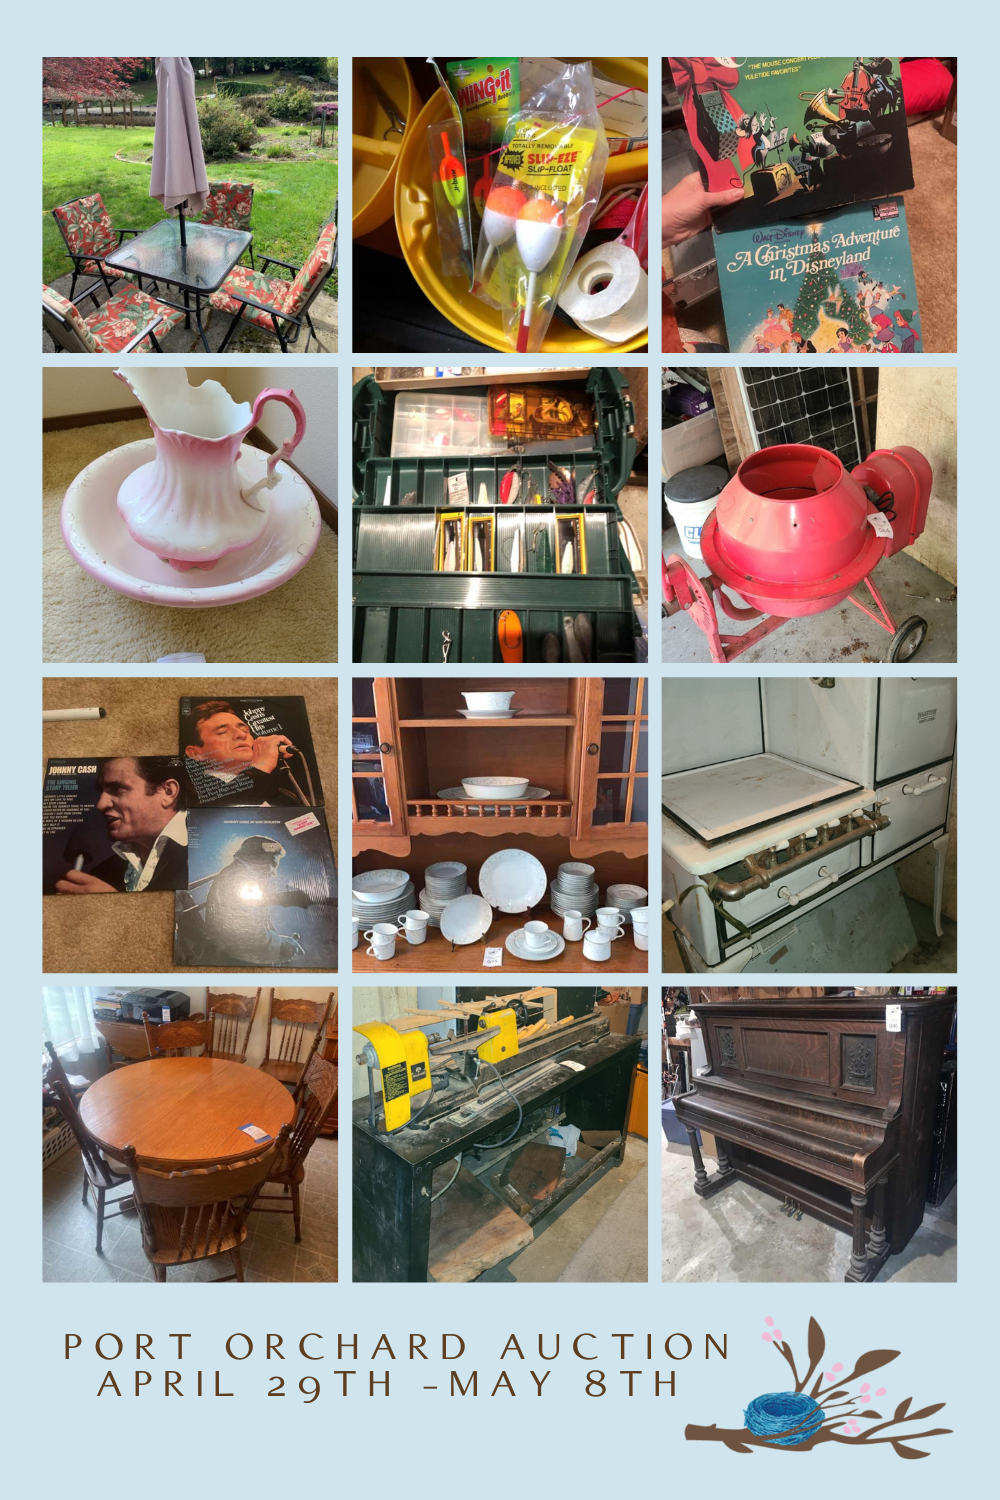 collage of items in online estate auction in Port Orchard Washington images features antiques, furniture, tools, fine china, outdoor patio set, cement mixer, fishing gear. Items sold with Maxsold through blue nest home